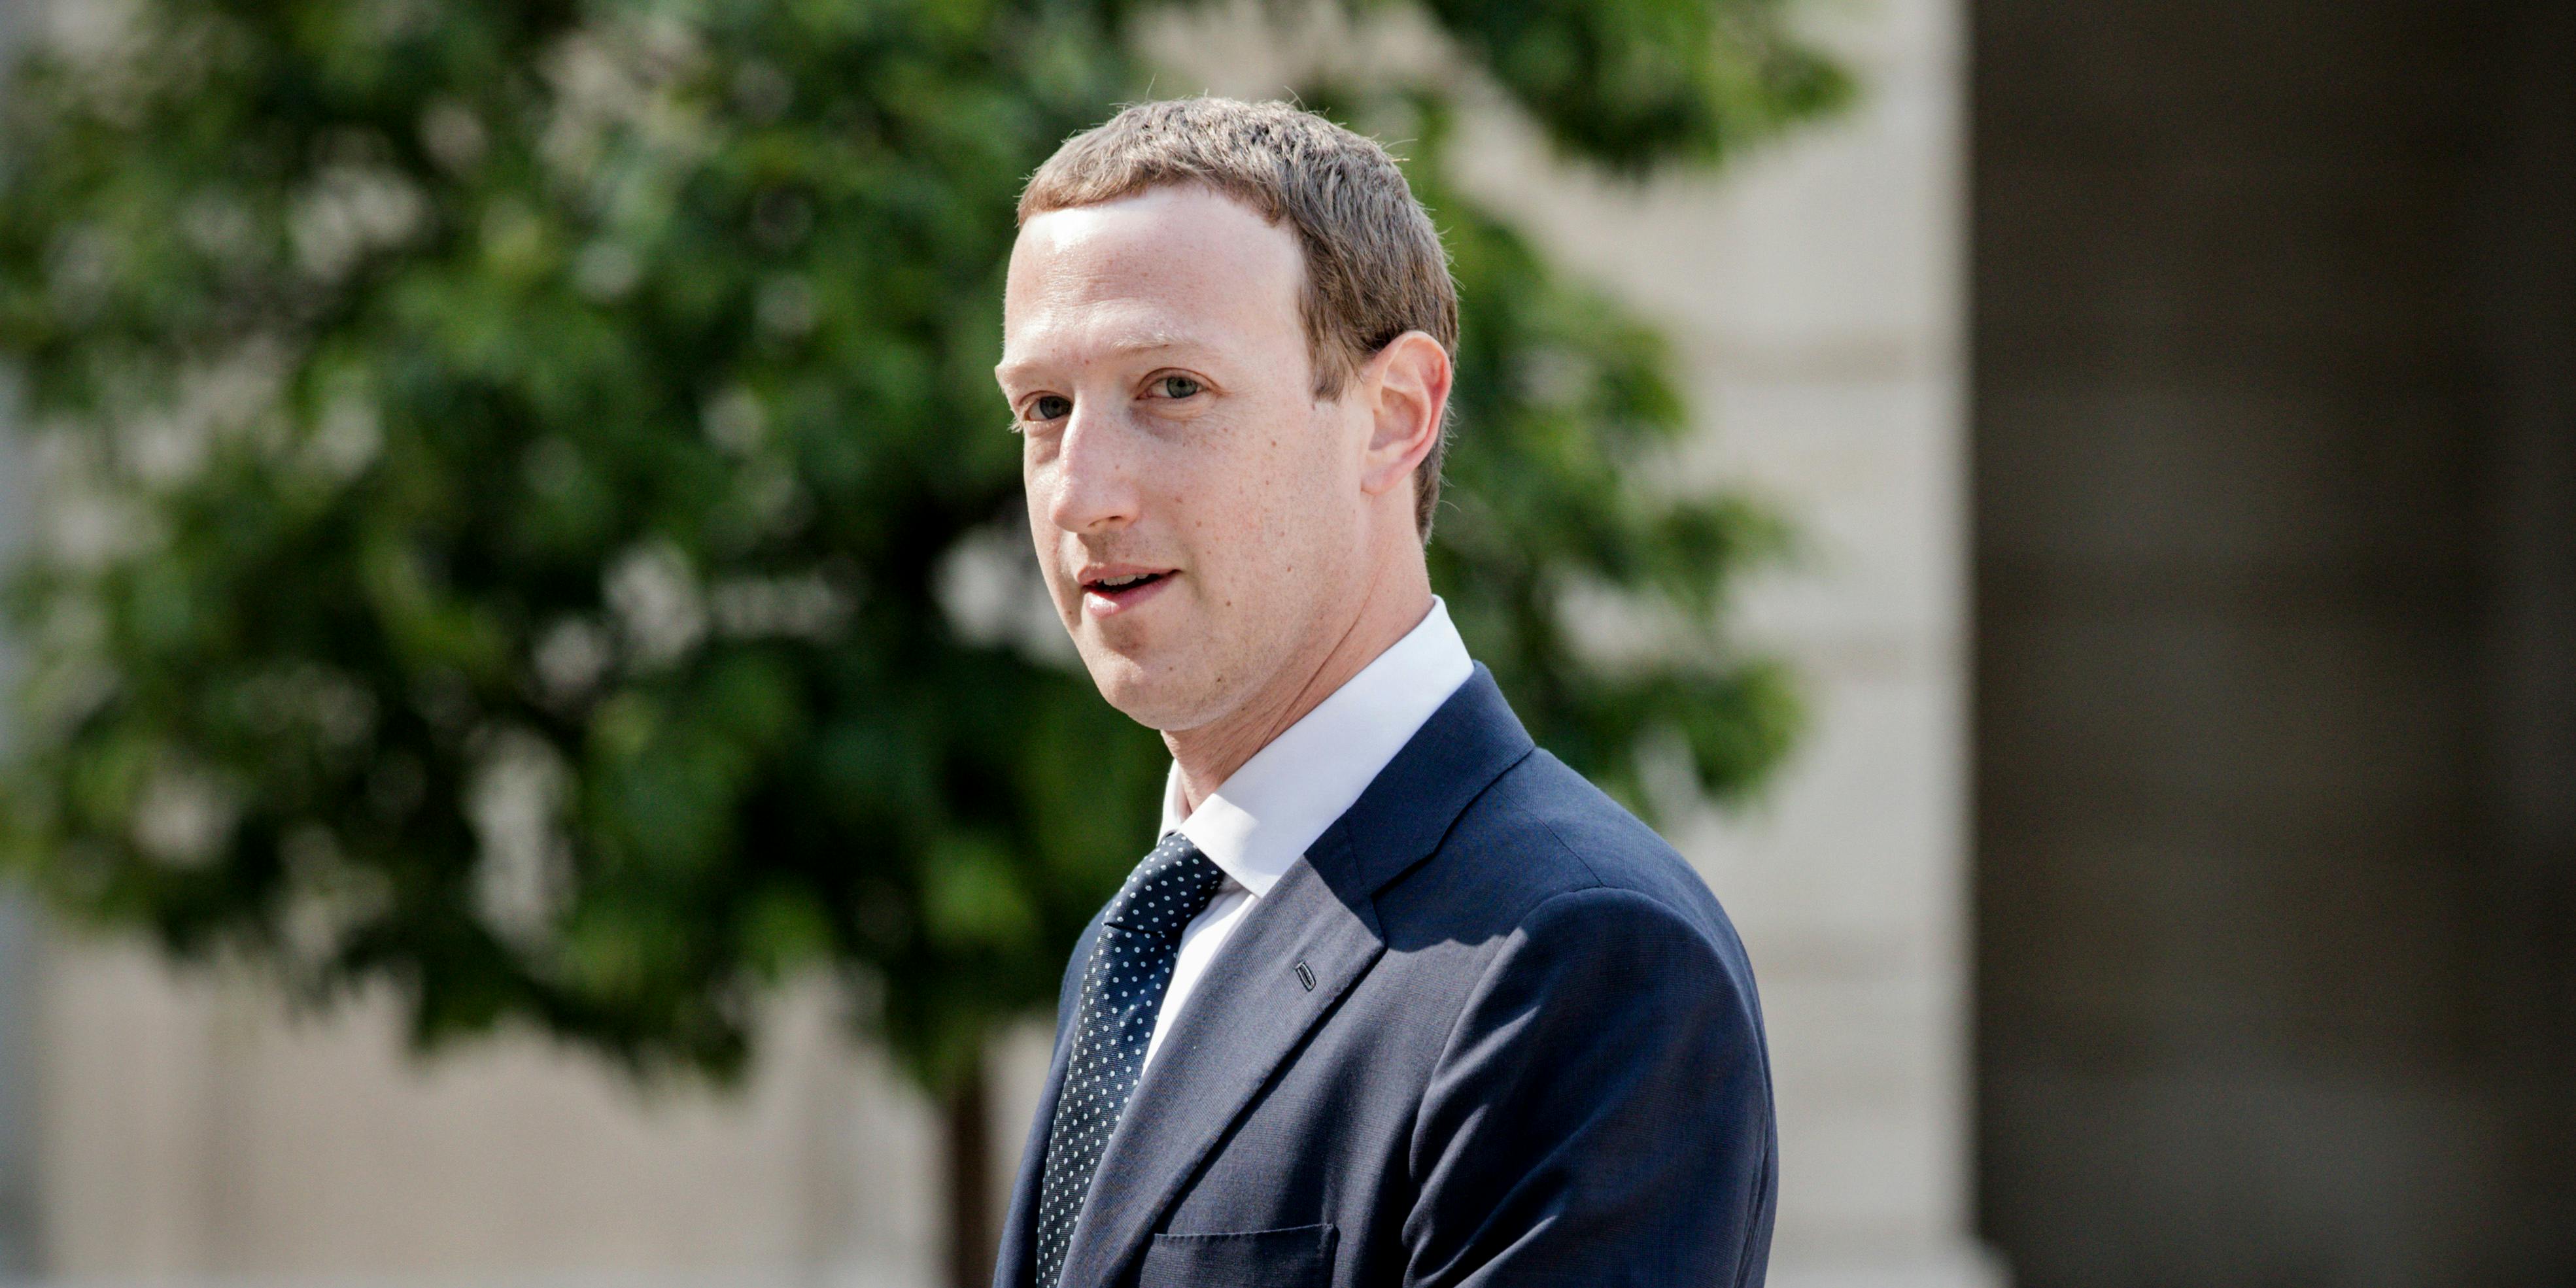 Facebook CEO Mark Zuckerberg heads for a meeting with the French President. Facebook is accused of shadow banning cannabis companies, essentially impacting their business by making them impossible to find on the social media site.